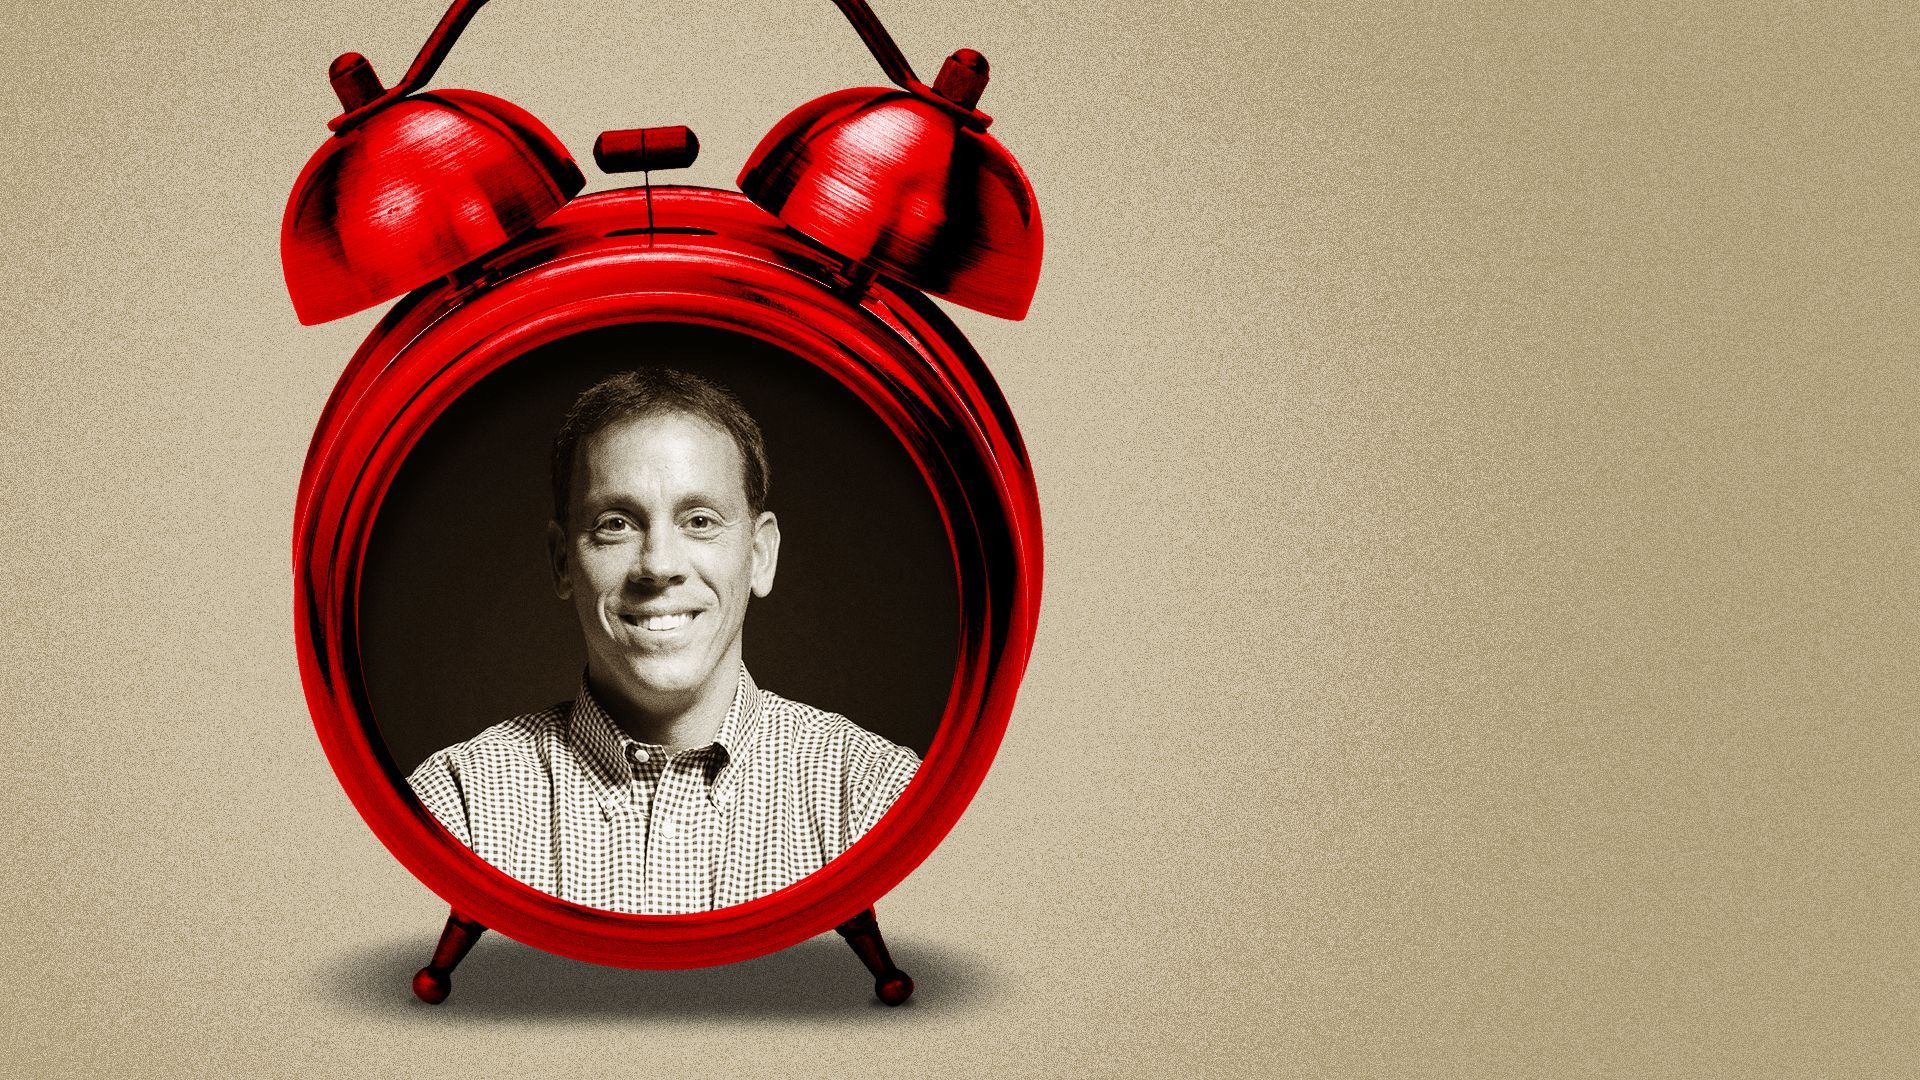 Photo illustration collage of Jim VandeHei inside a red alarm clock.